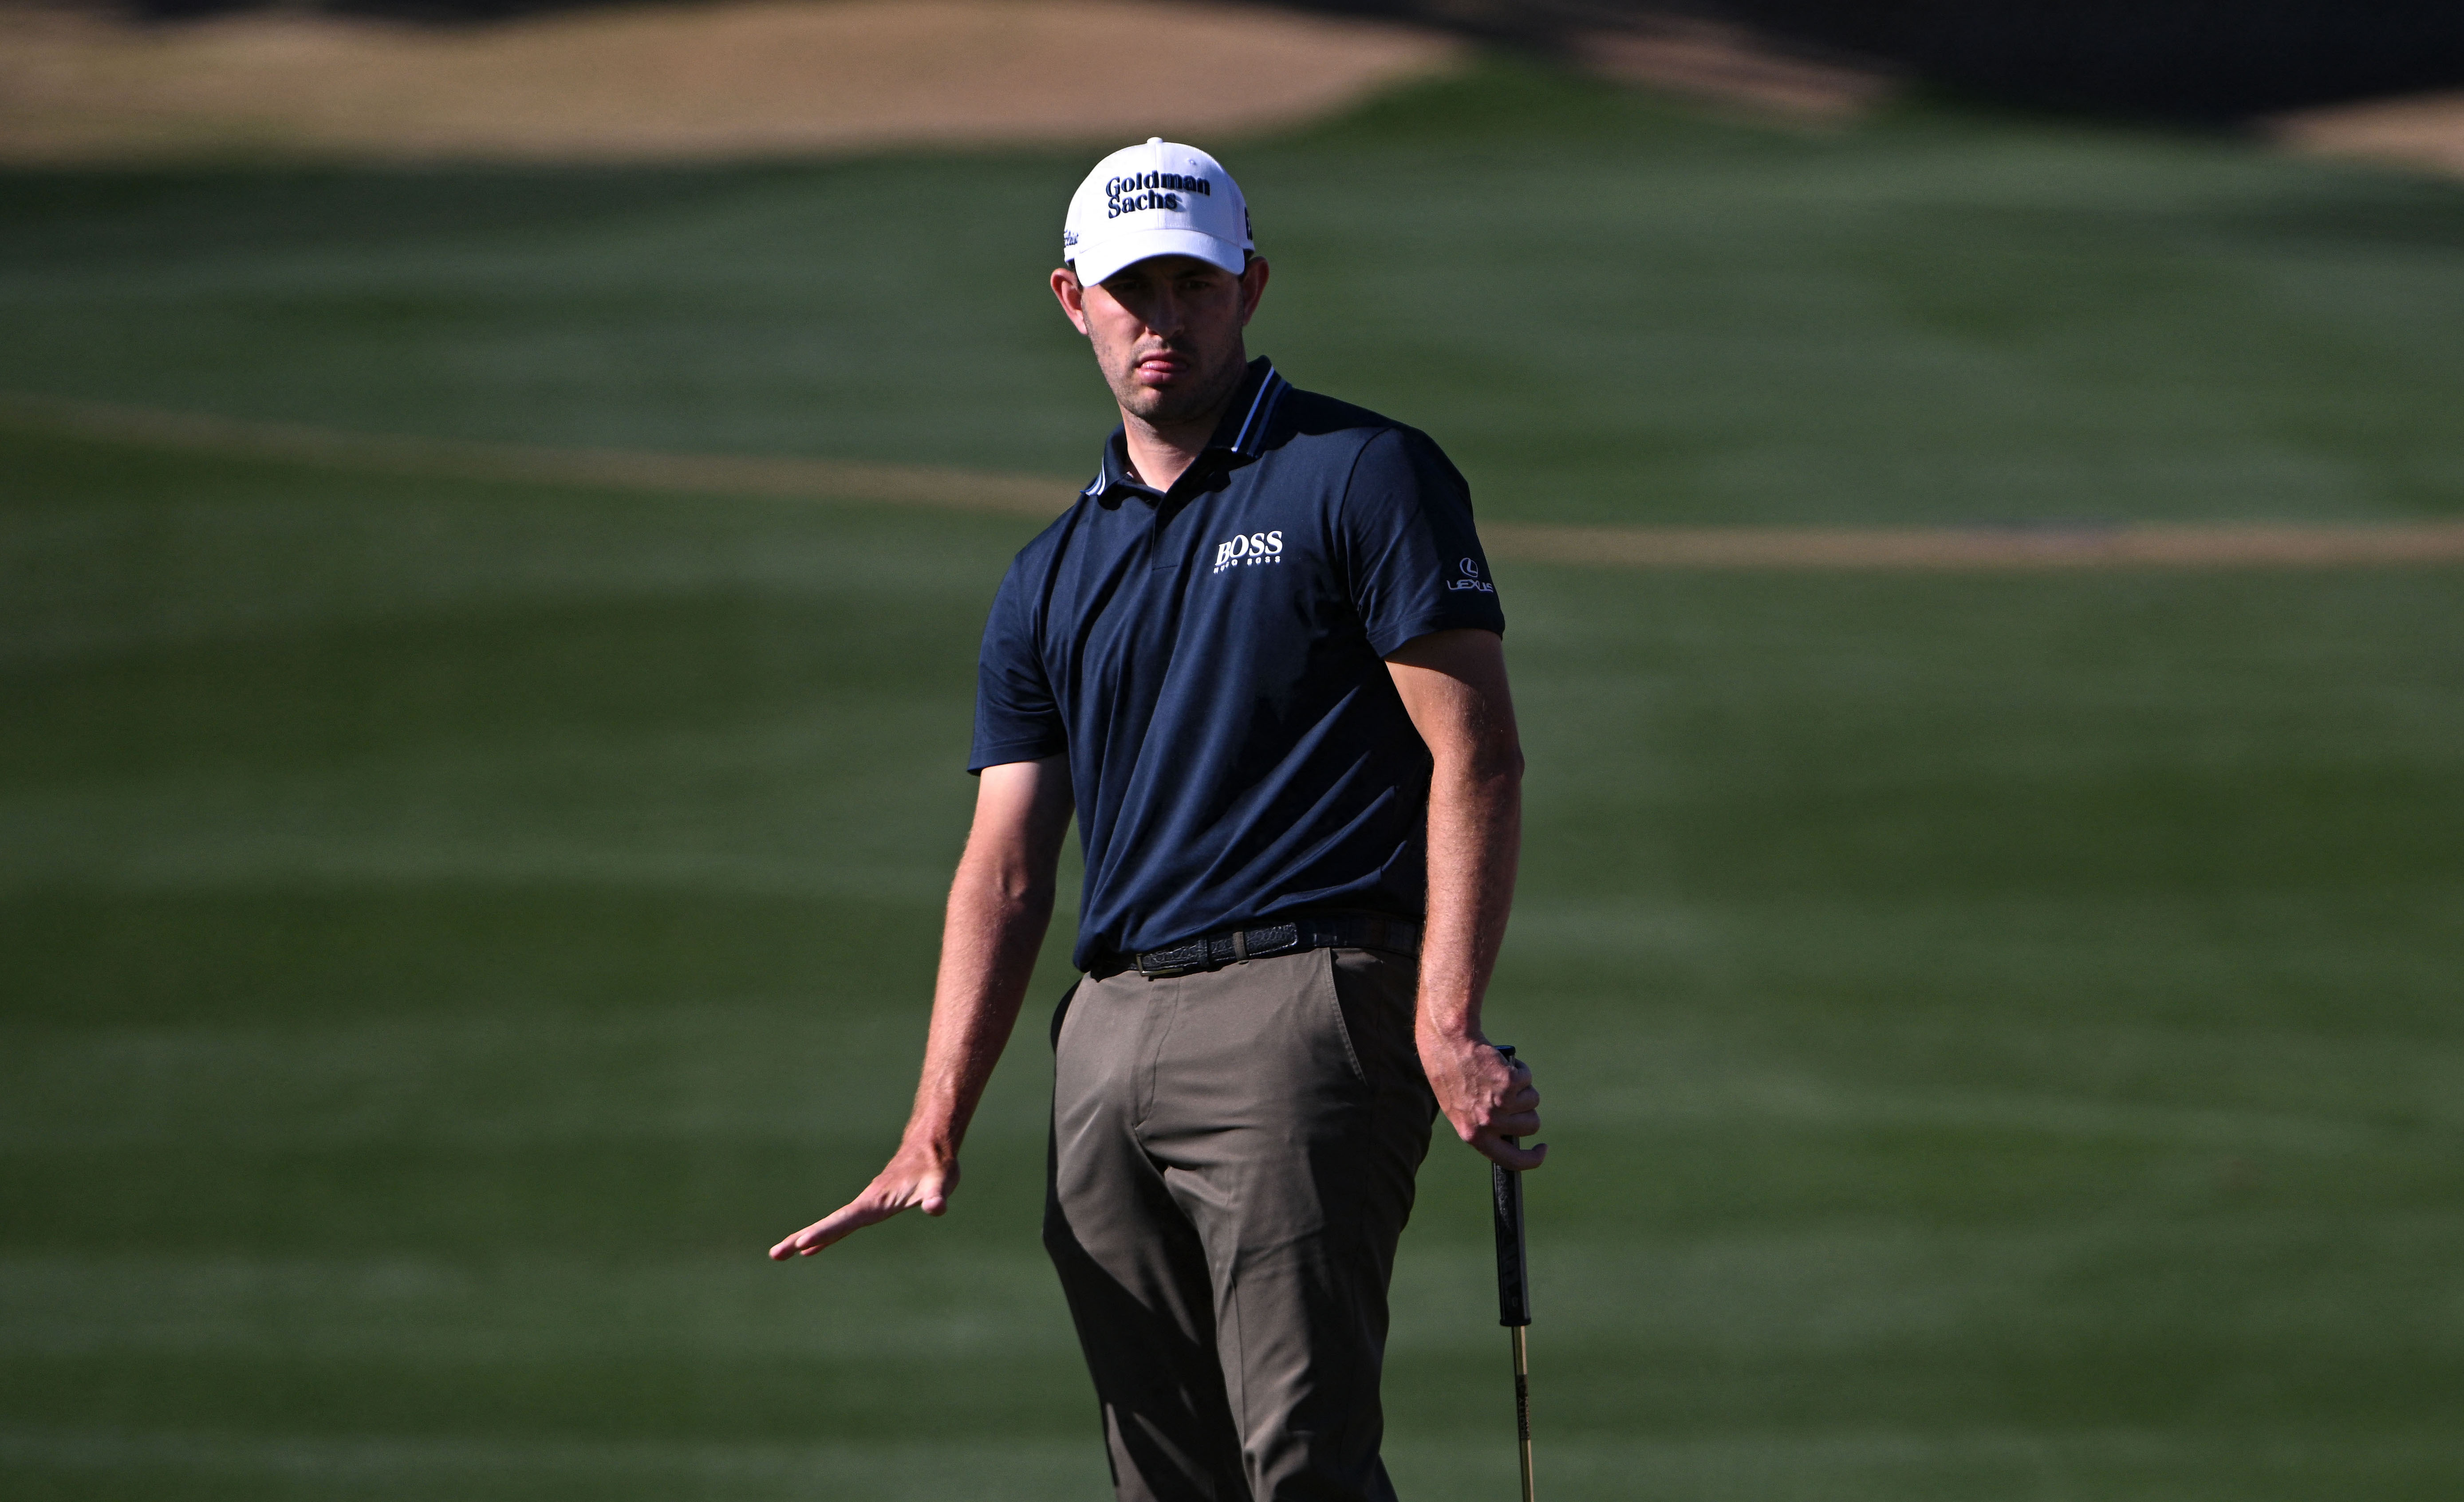 Patrick Cantlay in the hunt but has work to do at American Express on PGA  Tour | GolfMagic